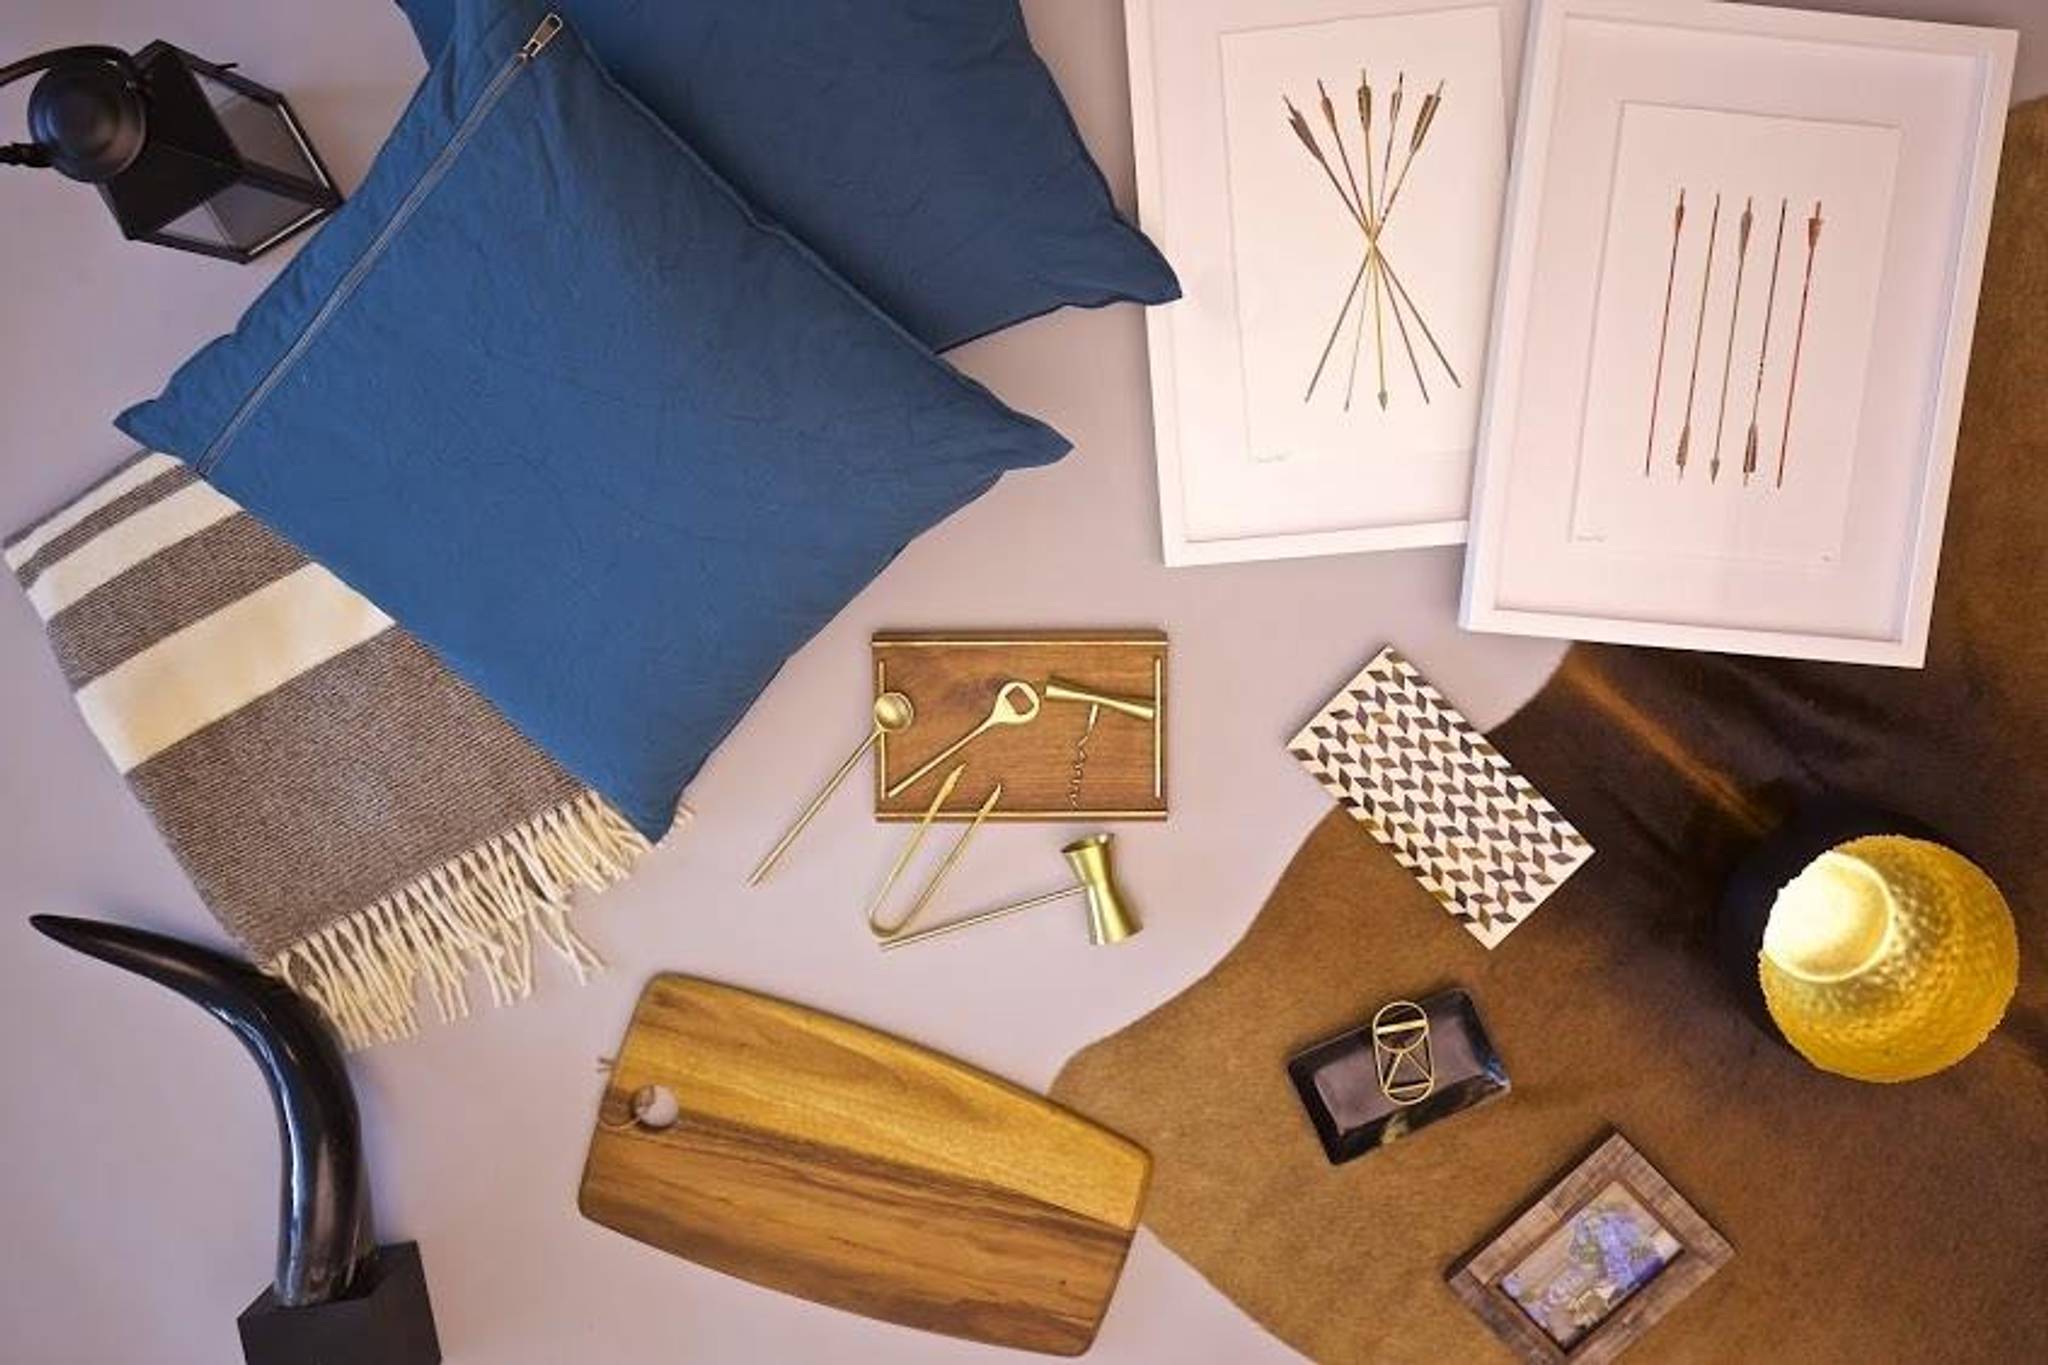 The Swatch Box ships personalised interior design